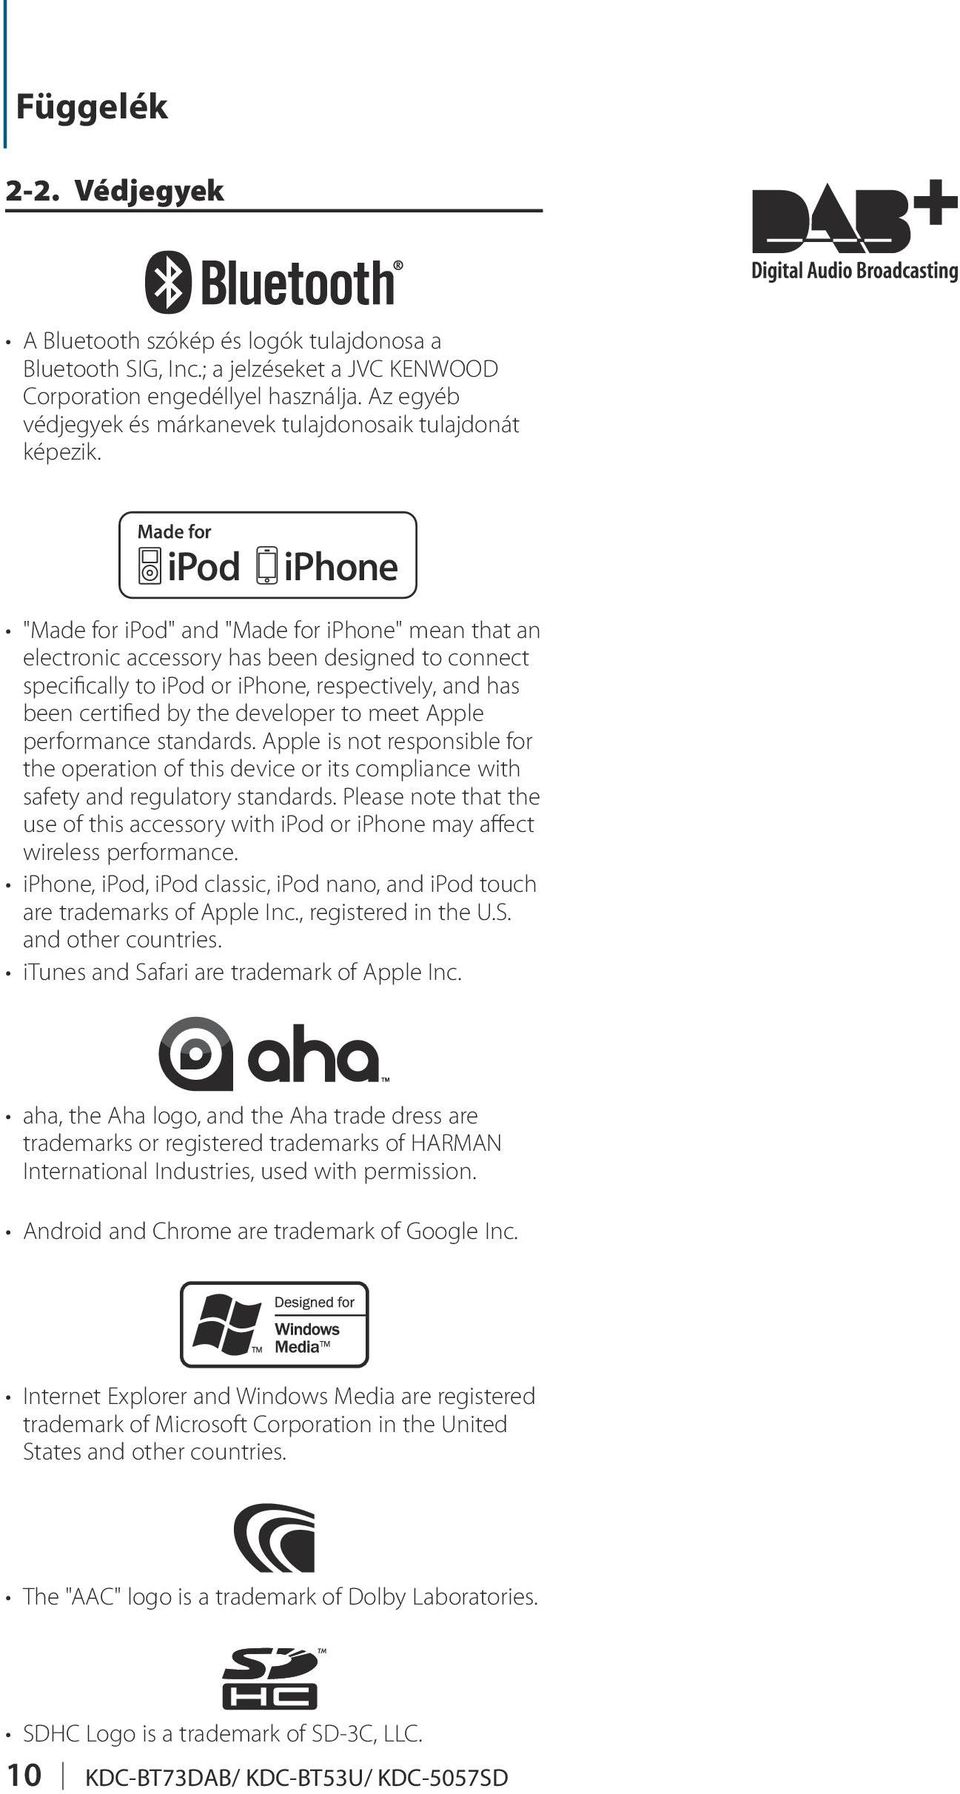 "Made for ipod" and "Made for iphone" mean that an electronic accessory has been designed to connect specifically to ipod or iphone, respectively, and has been certified by the developer to meet